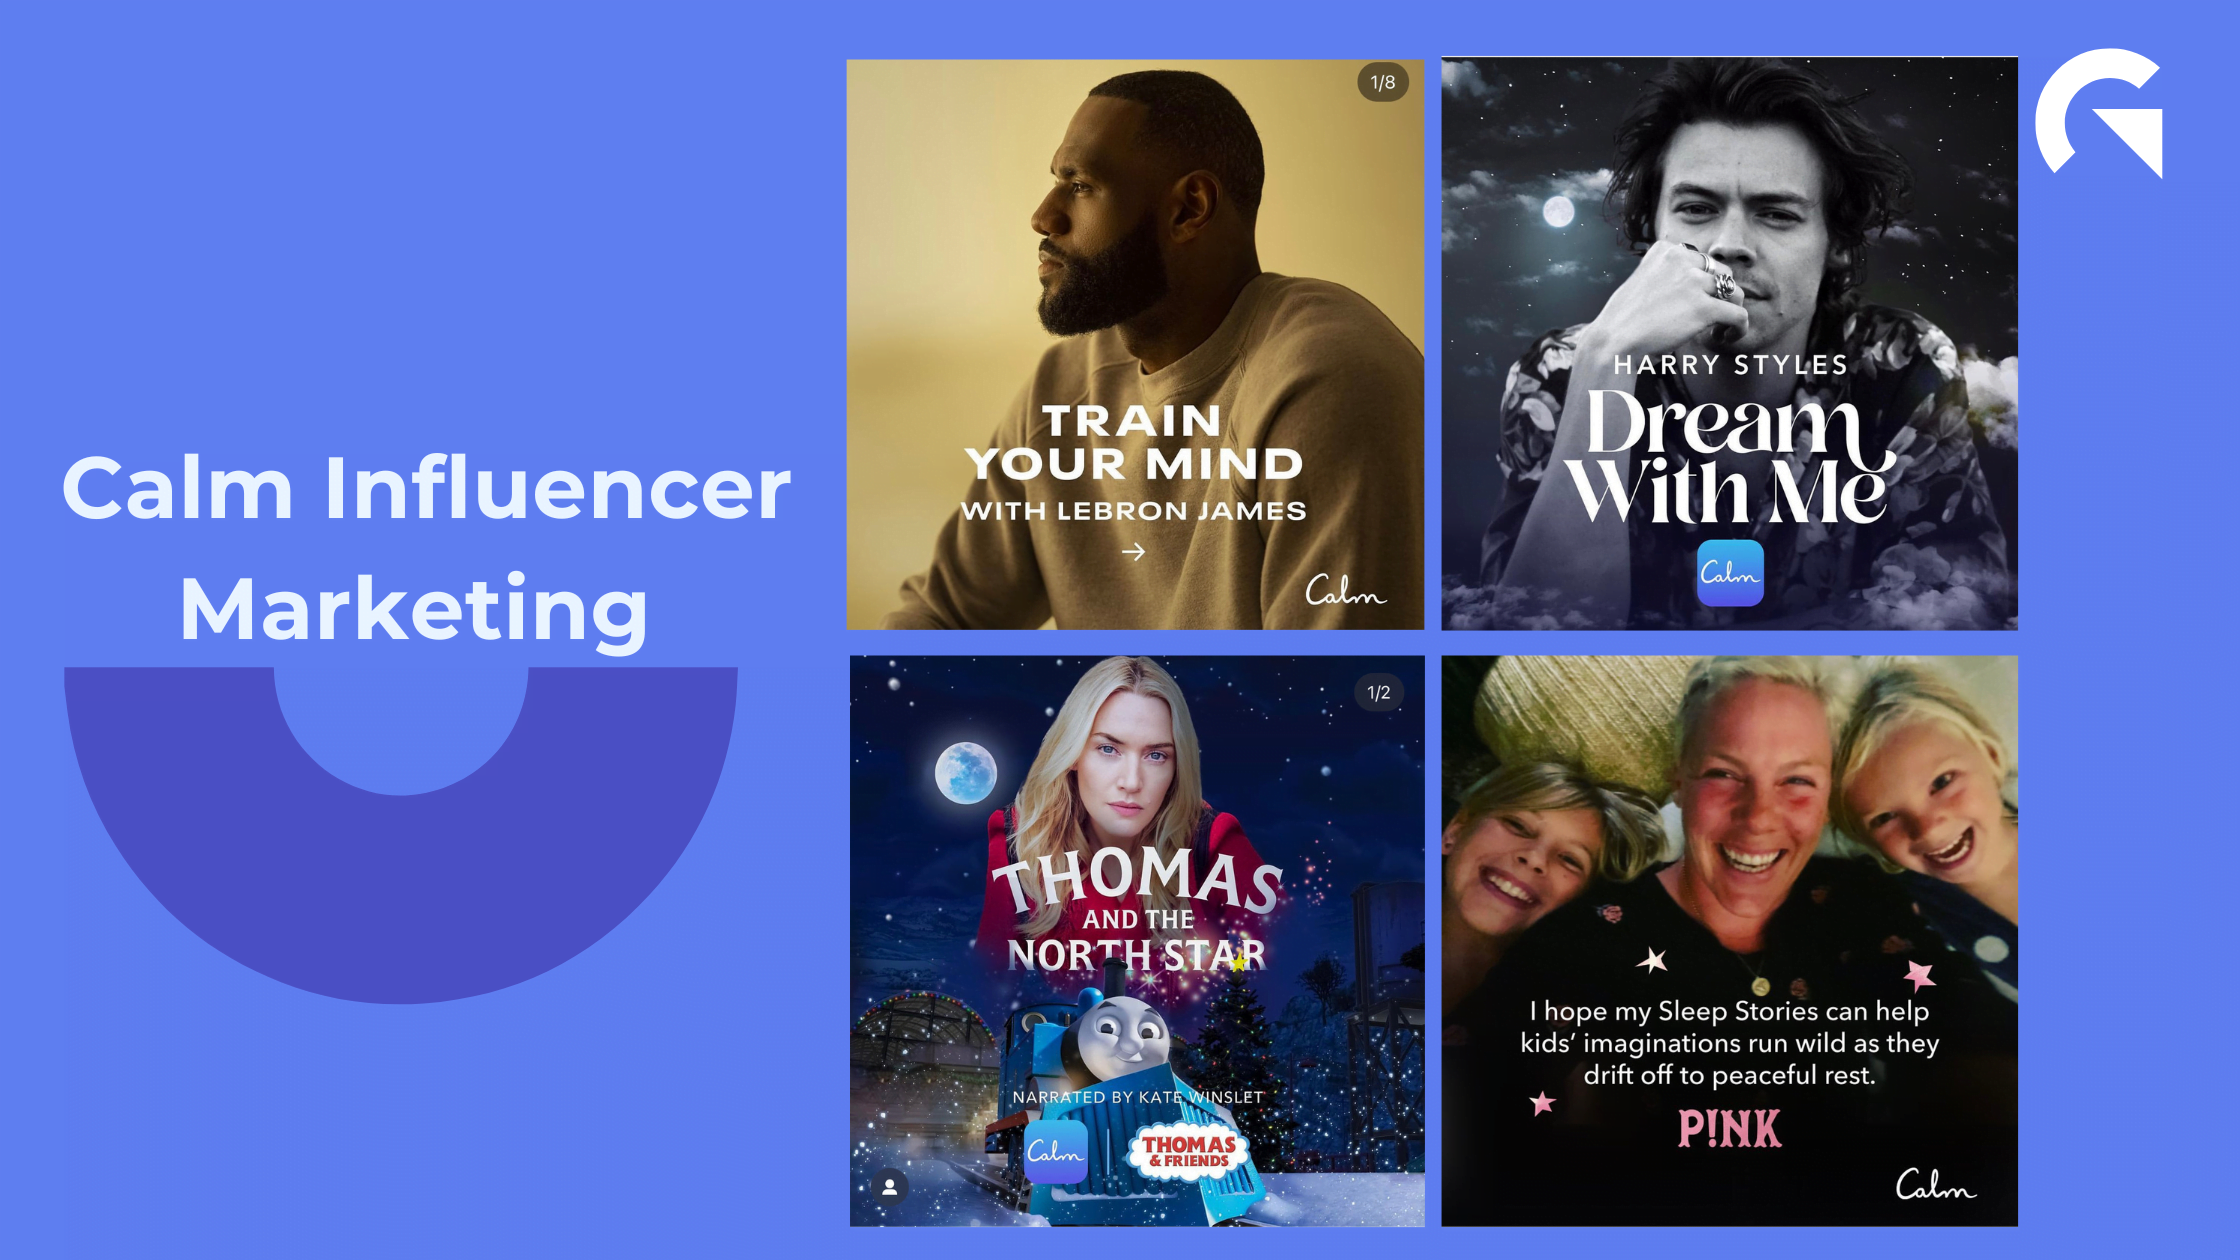 Half post with text "Calm Influencer Marketing" with collage of four unique images featuring Harry Styles, LeBron James, Kate Winslet and P!nk. 